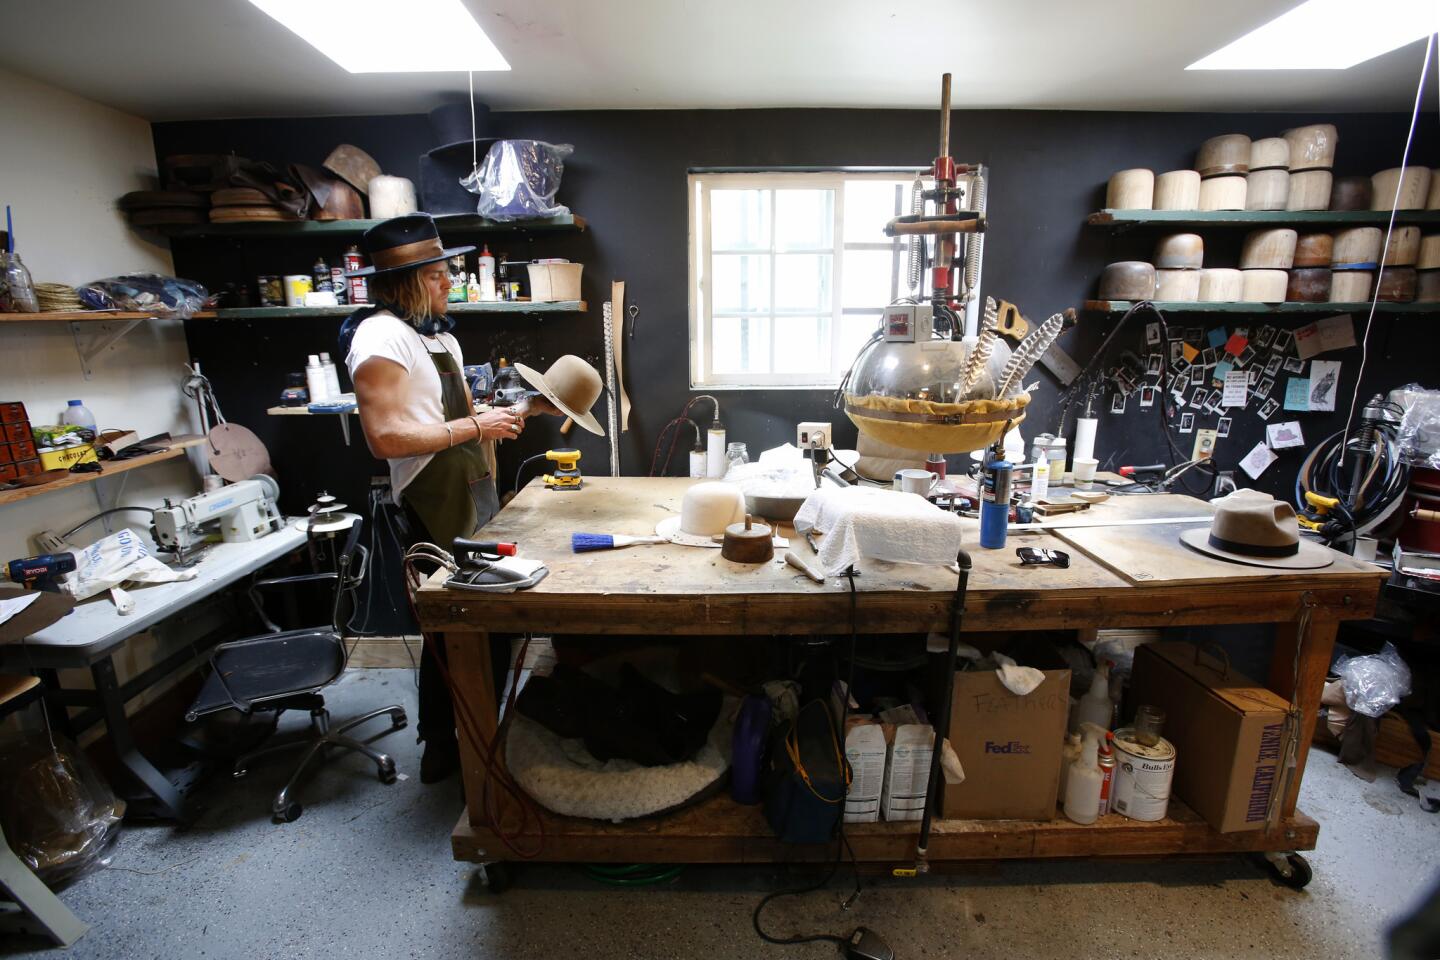 Nick Fouquet, who is also a model, handcrafts one-of-a-kind hats in his Venice studio. His creations have become popular among celebrities such as Madonna and Pharrell Williams.